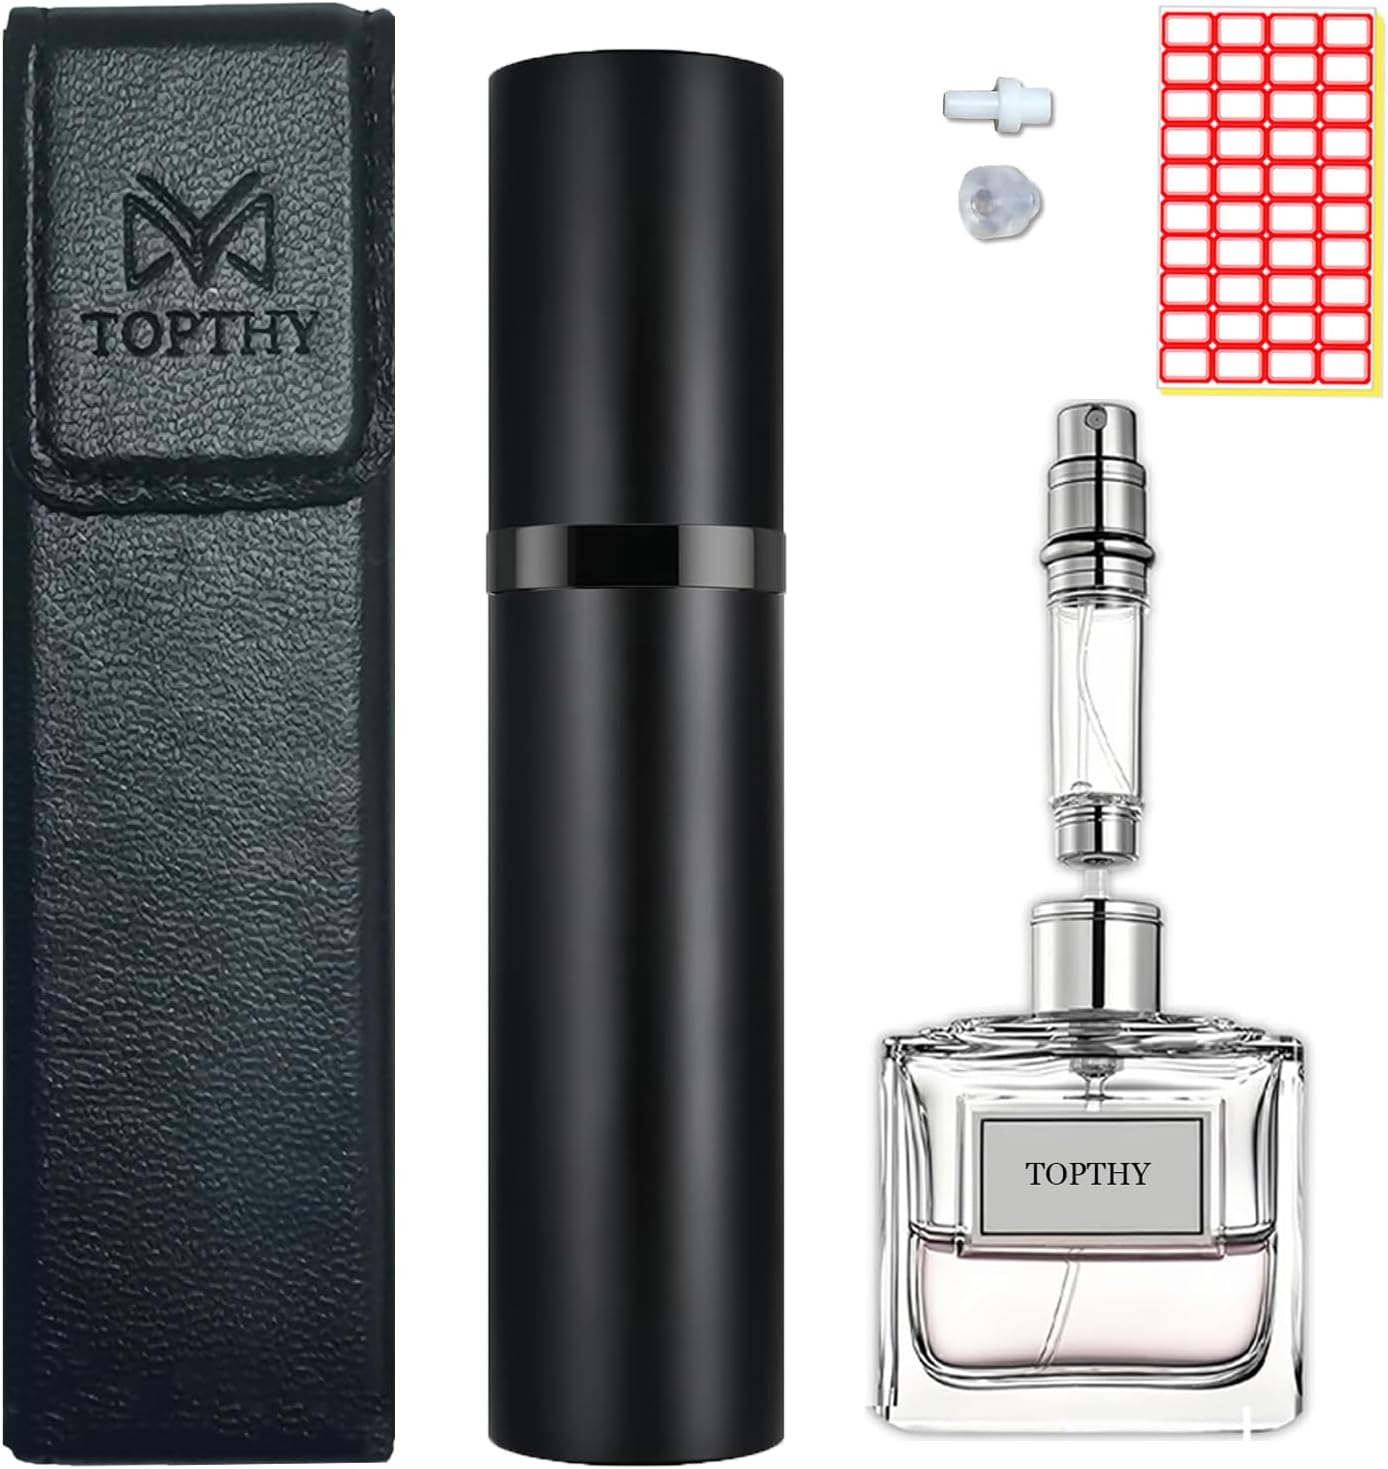 Perfume Travel Refillable Bottle-The Best Gifts For Travelers